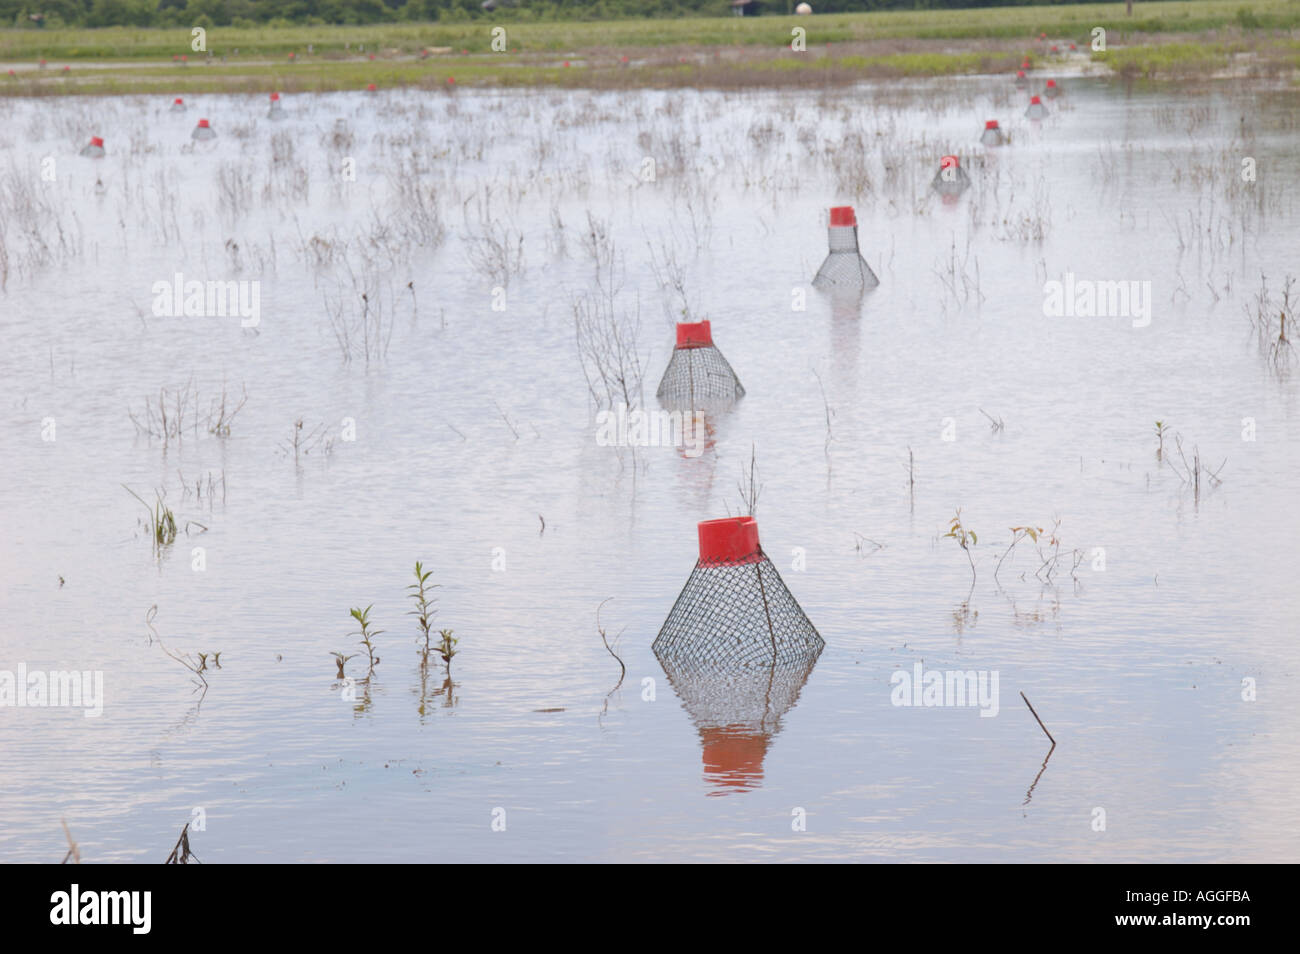 Crawfish traps in a flooded field in Louisiana Crawfish raising is